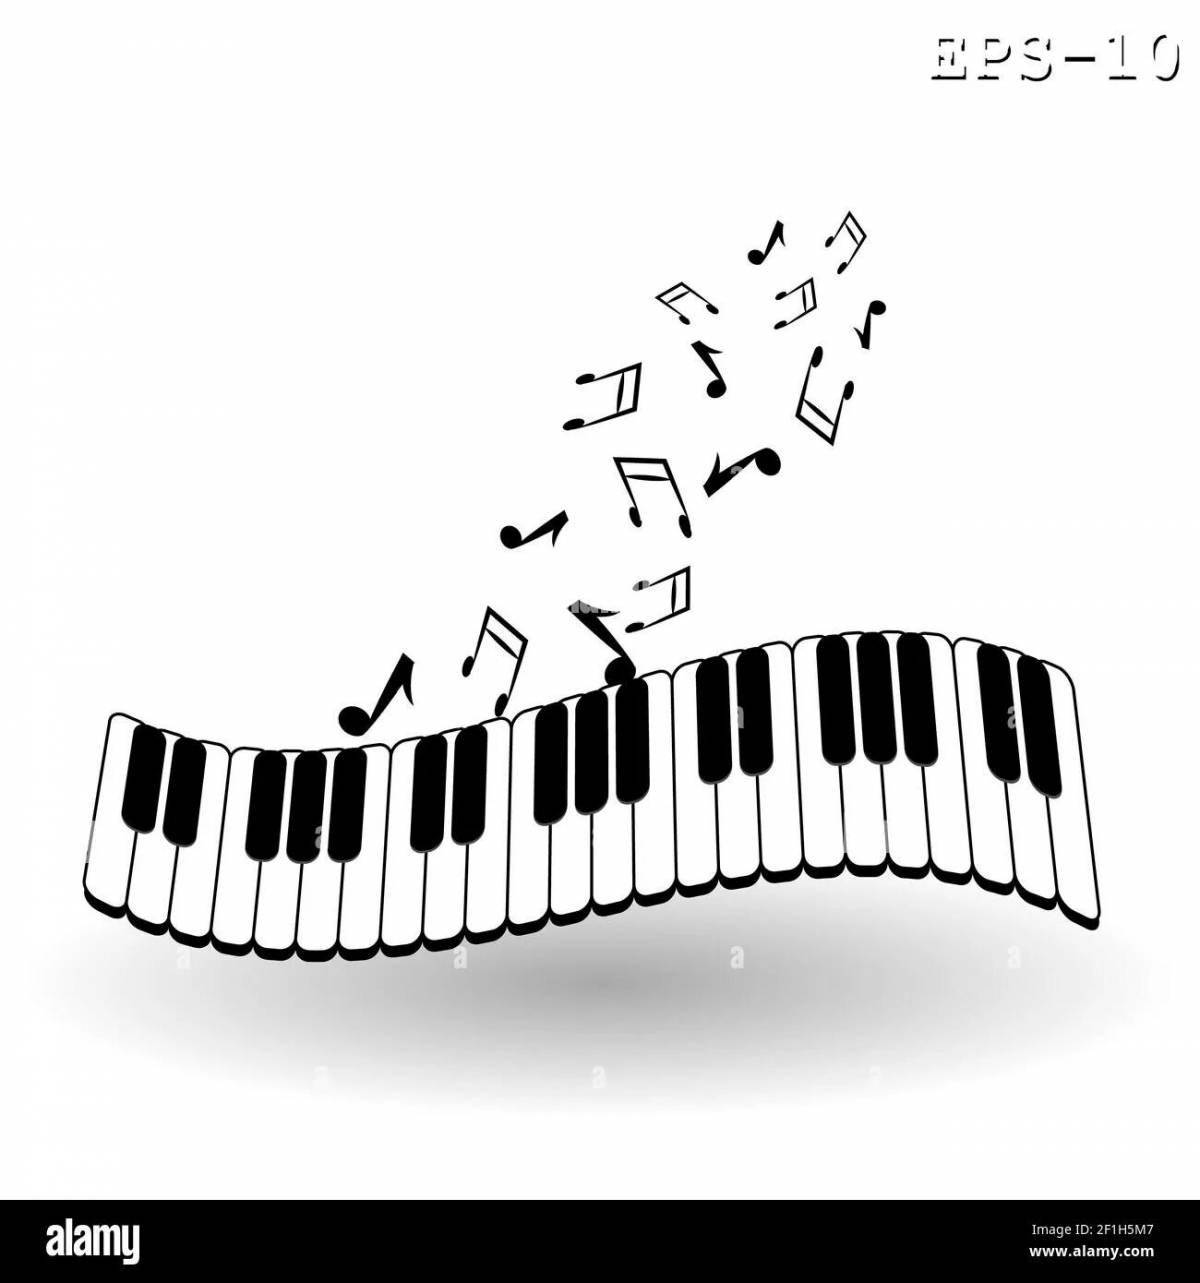 Coloring piano keys filled with joy